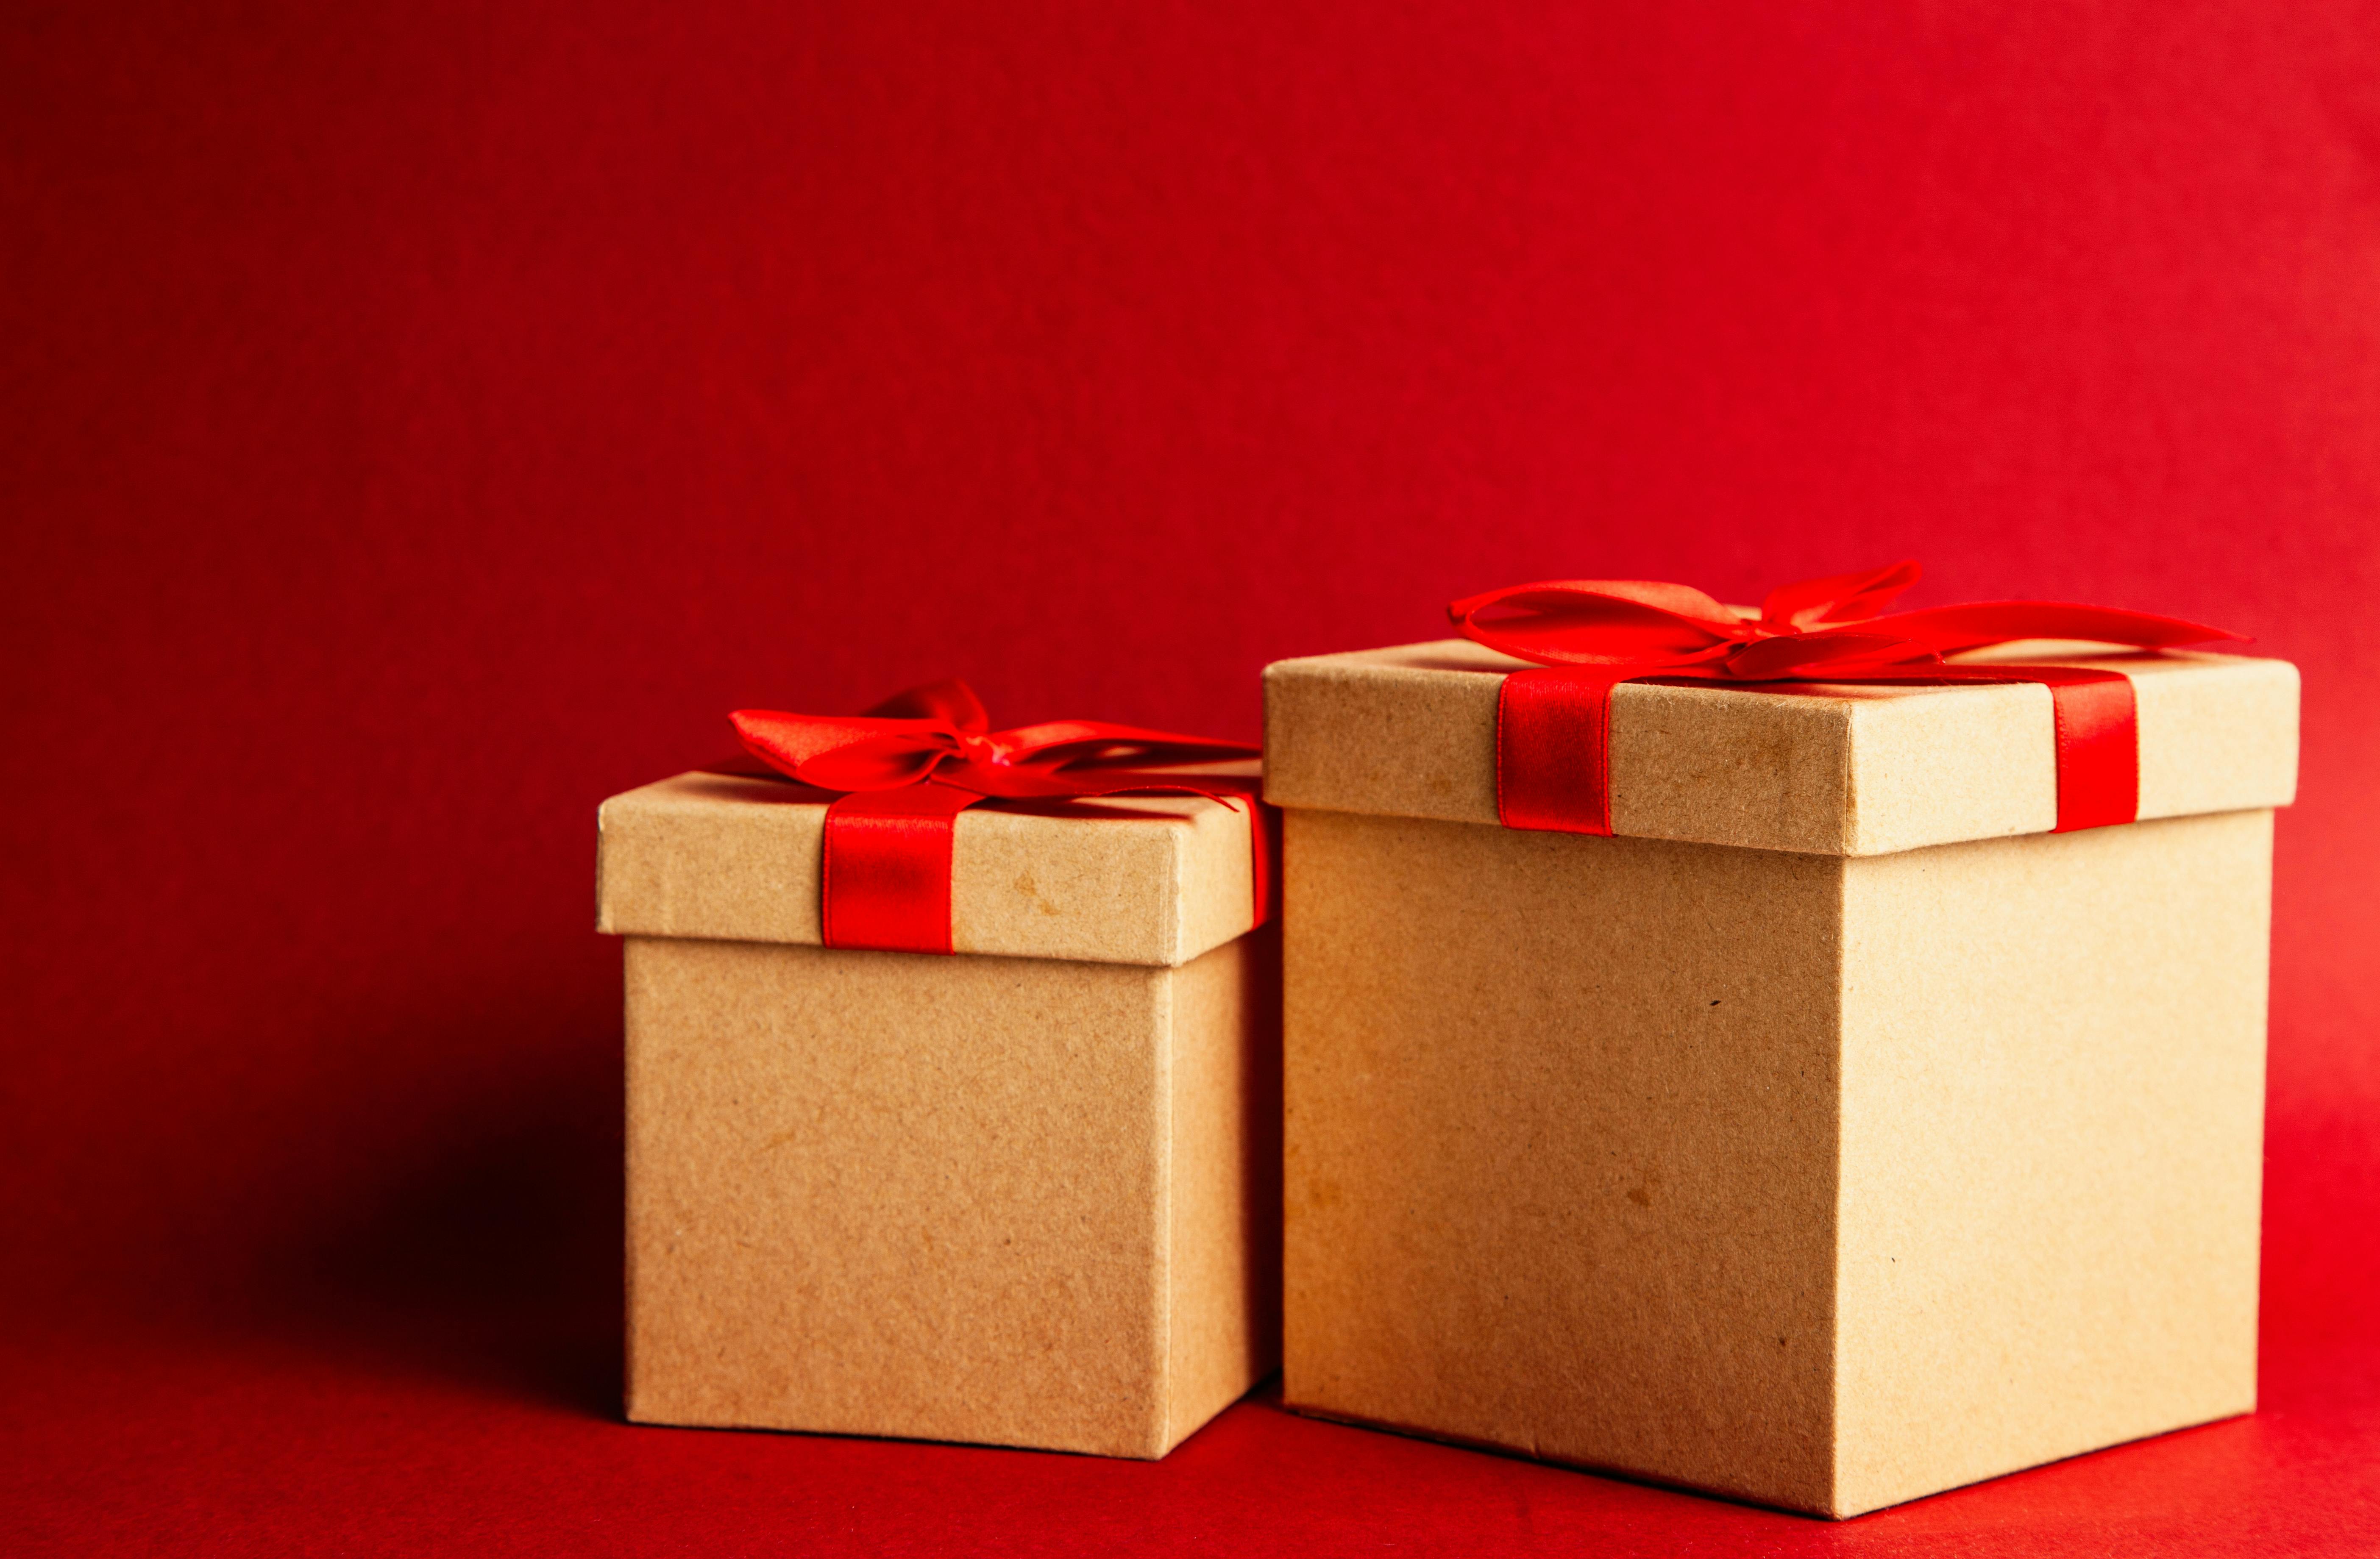 A couple of gift boxes | Source: Pexels